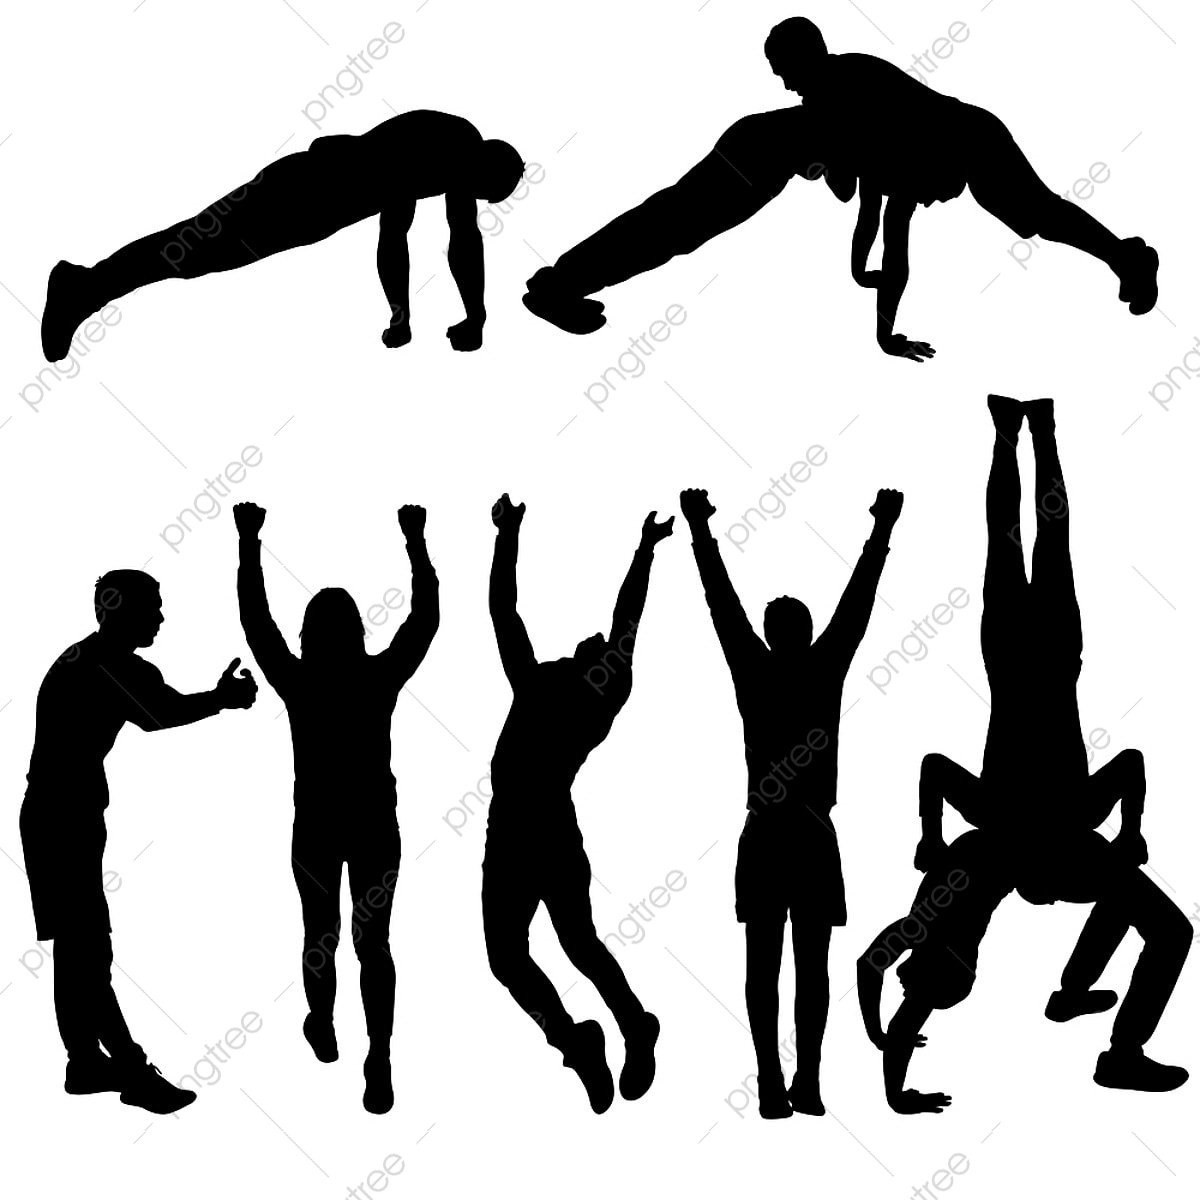 Gymnastics performed to the accompaniment of music is called